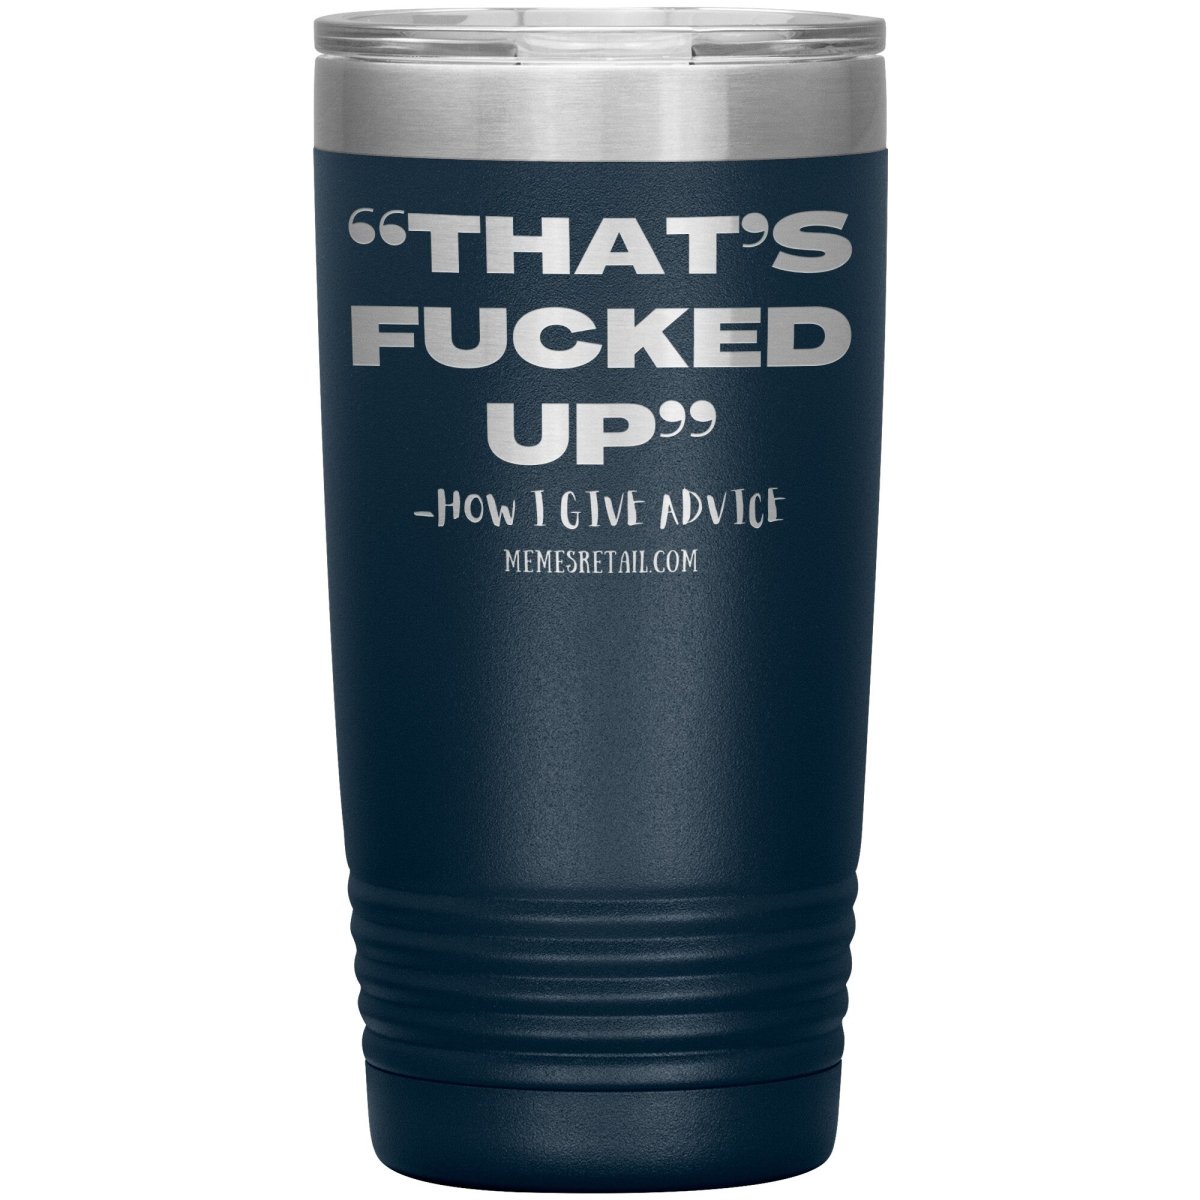 “That’s Fucked Up” -how I give advice Tumblers, 20oz Insulated Tumbler / Navy - MemesRetail.com